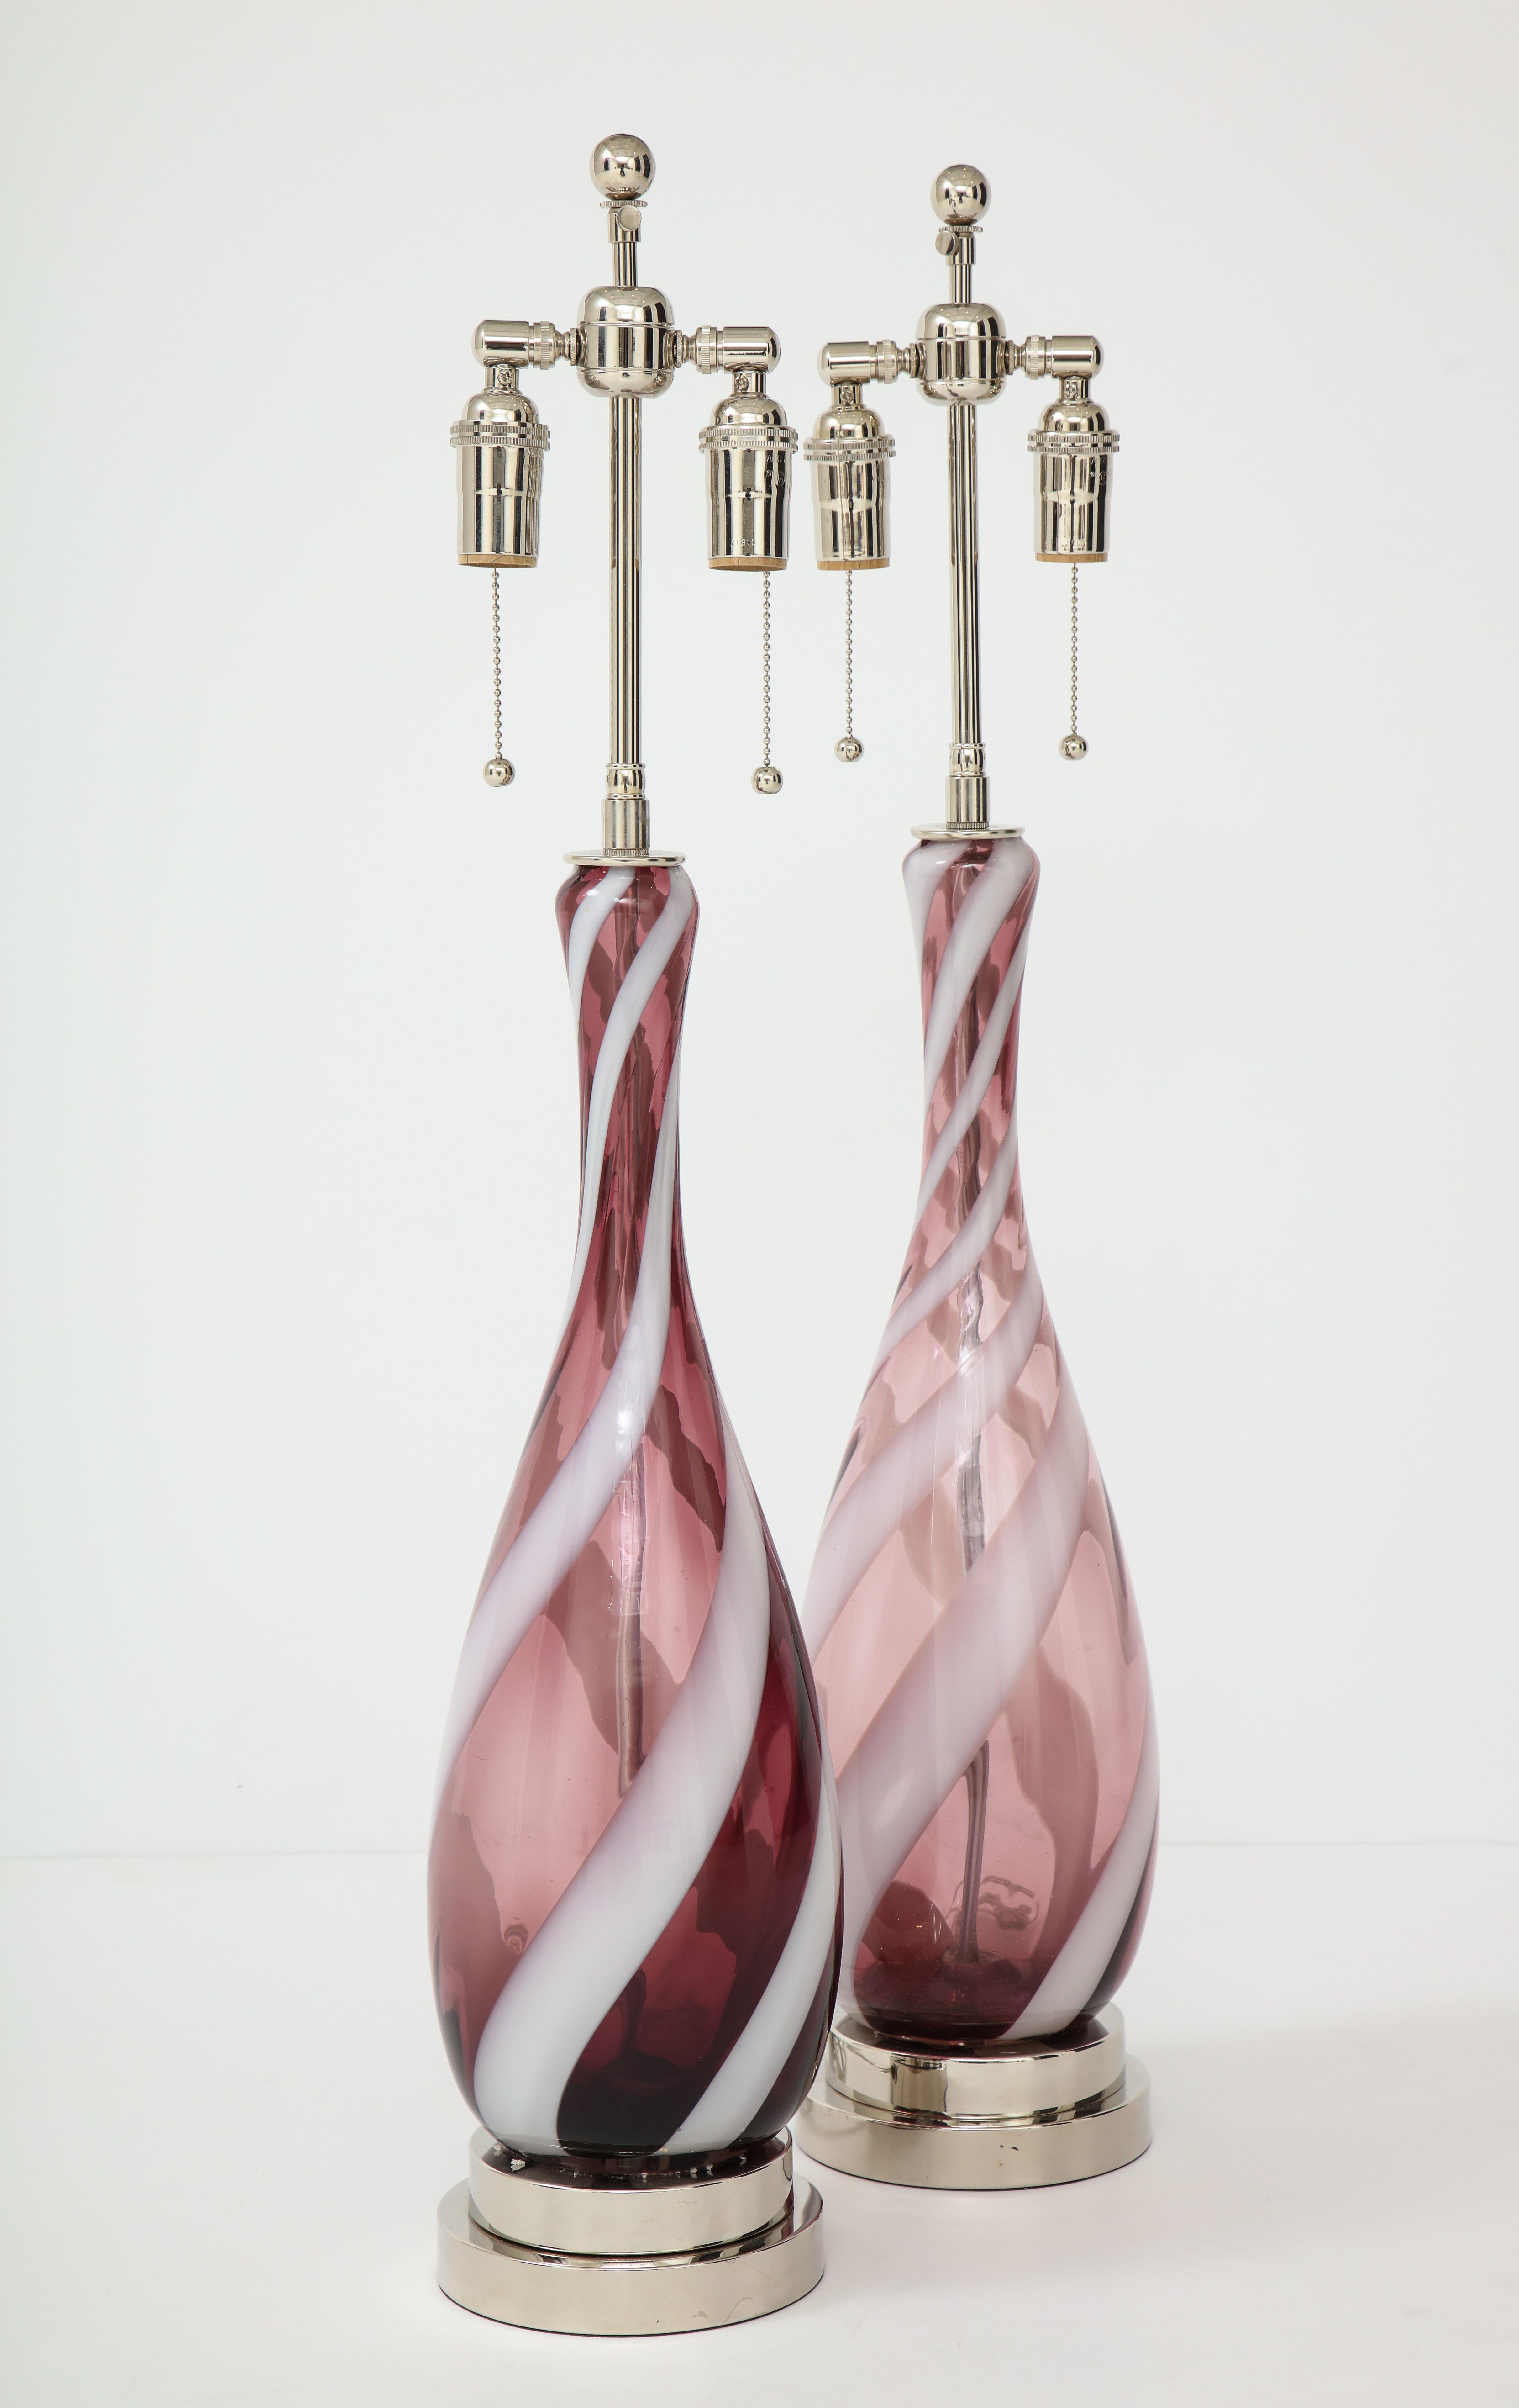 Pair of 1960s amethyst and white Murano glass lamps.
The lamps are mounted on polished stacked nickel bases and they
have been newly rewired with nickel double clusters.